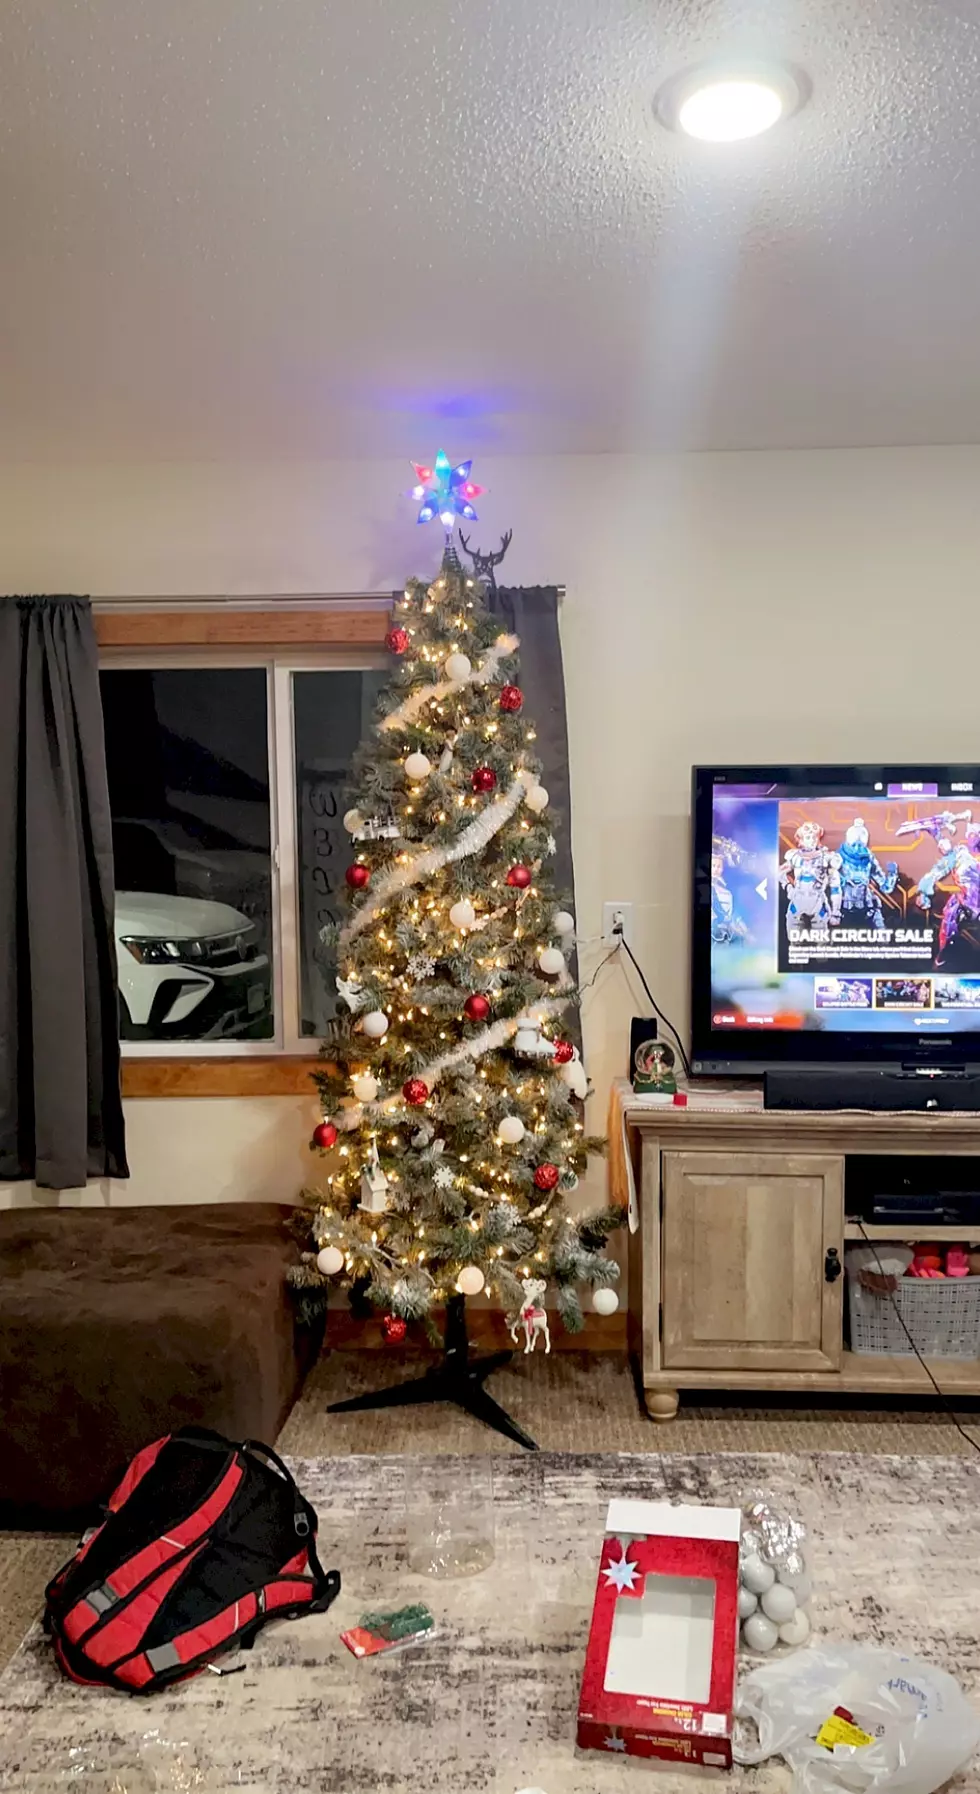 I'm done with decorating for the holidays — thanks to these smart lights